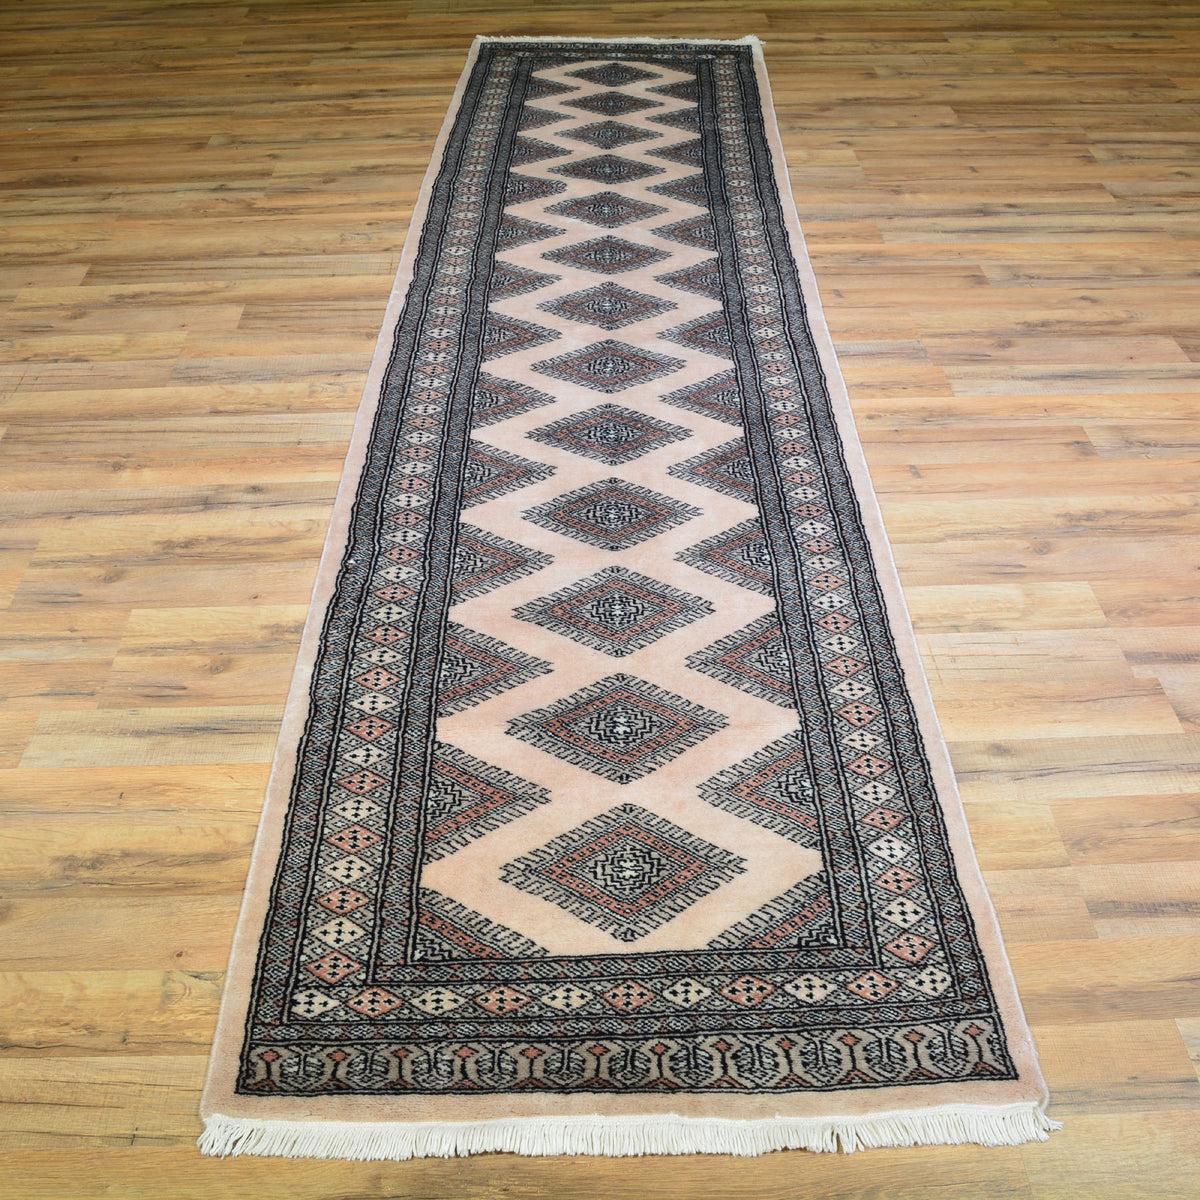 2'6 x 4'2 Pak Mori Bokhara Area Rug with Wool Pile a 2x4 Small Rug an Authentic Hand Knotted Bokhara Jaldar Rug 